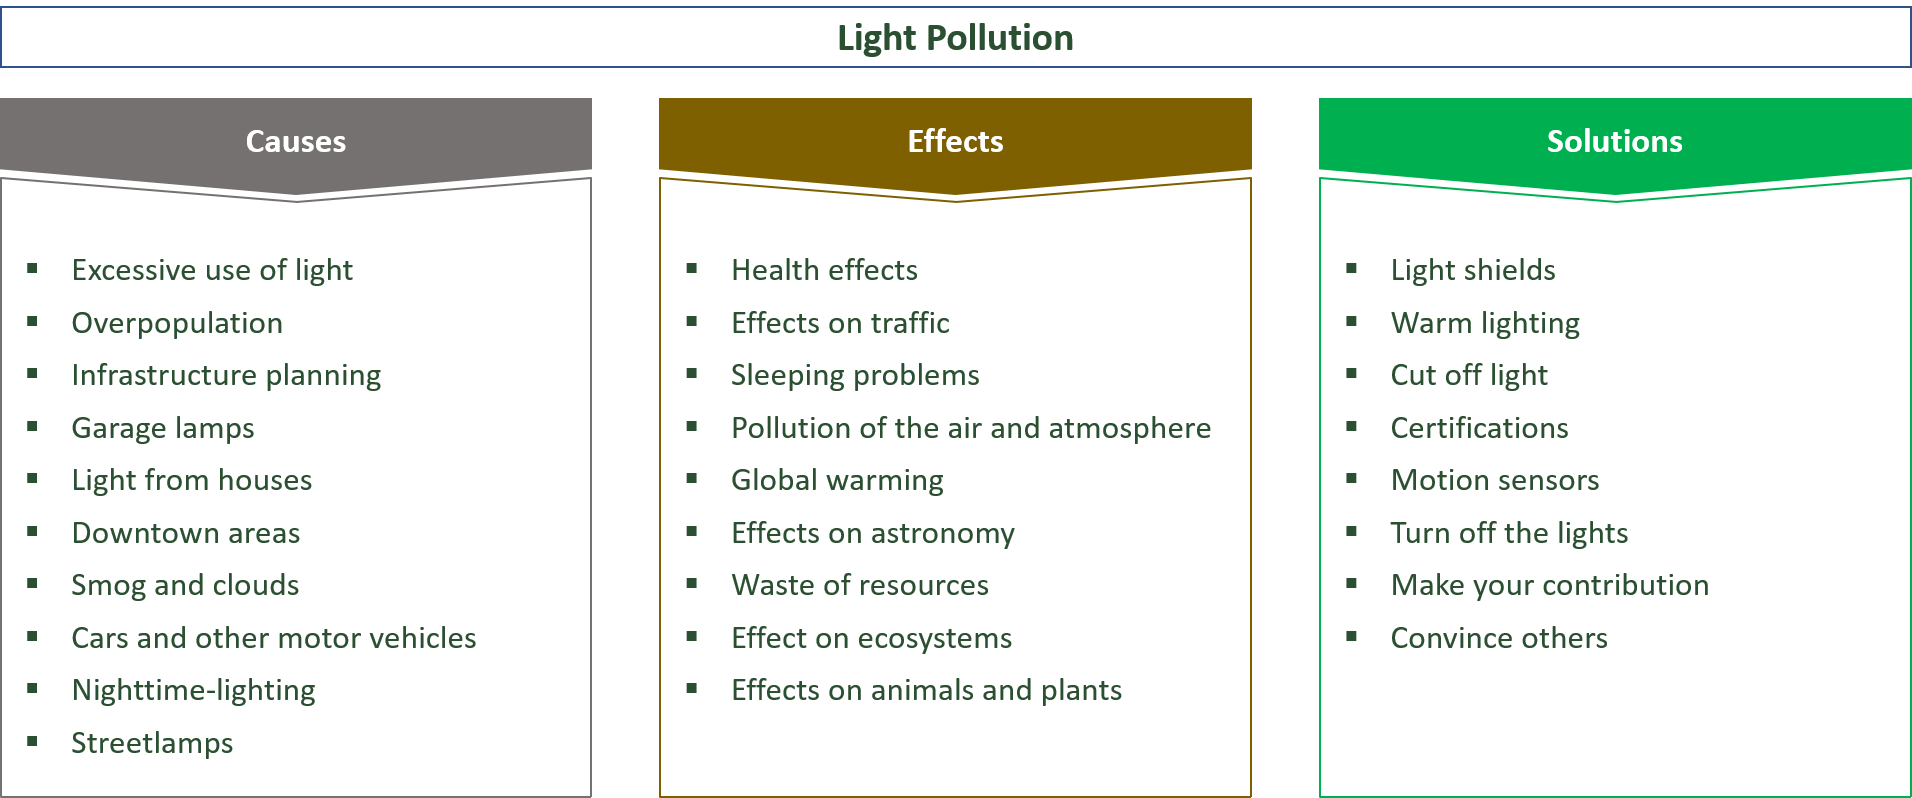 causes, effects and solutions for light pollution